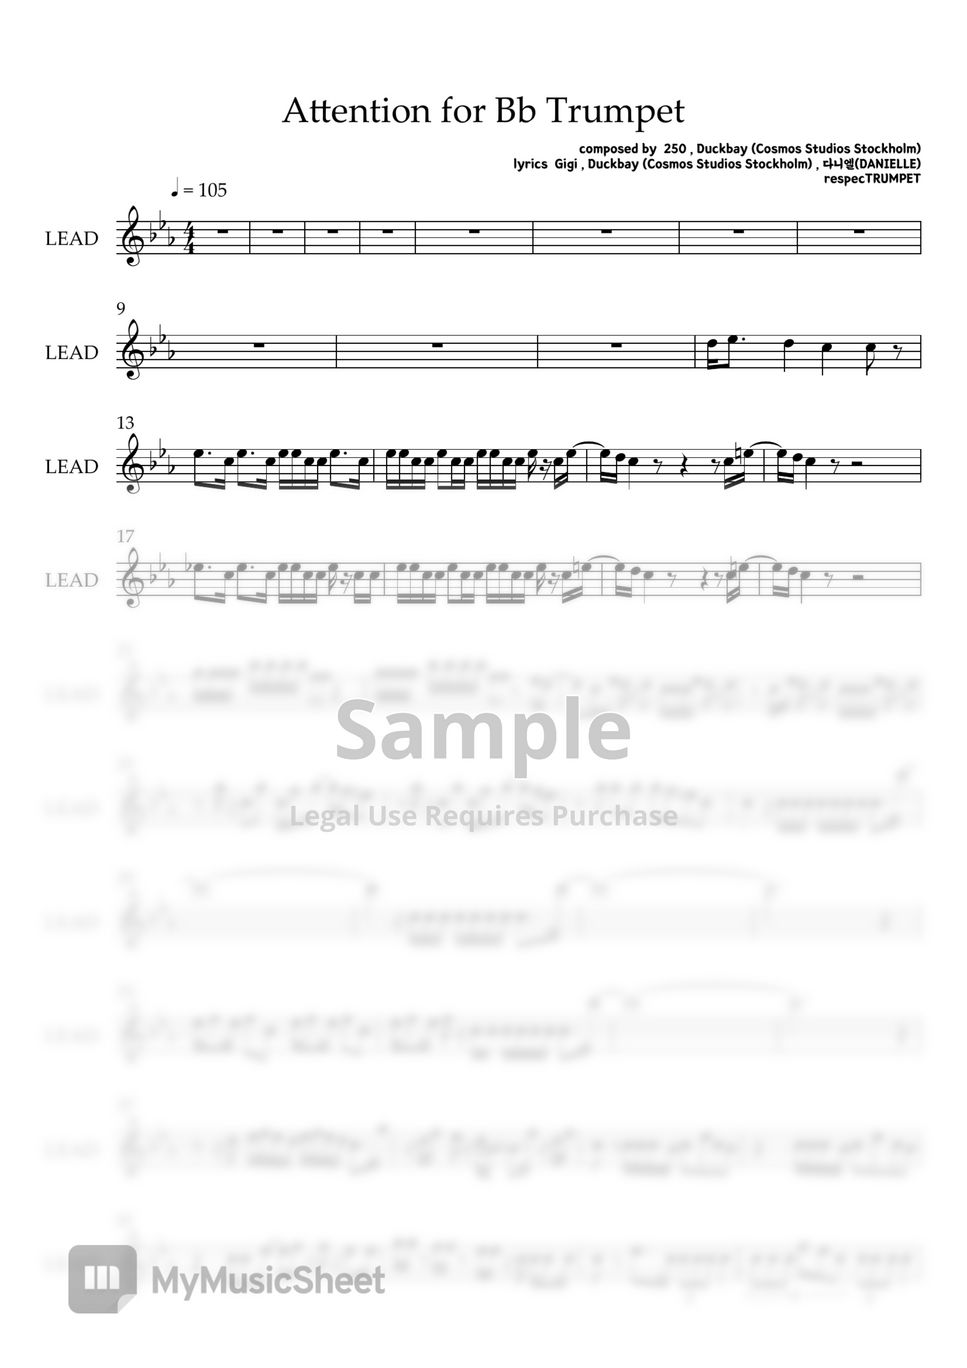 newjeans - attention (for Bb Trumpet lead sheet) by respecTRUMPET